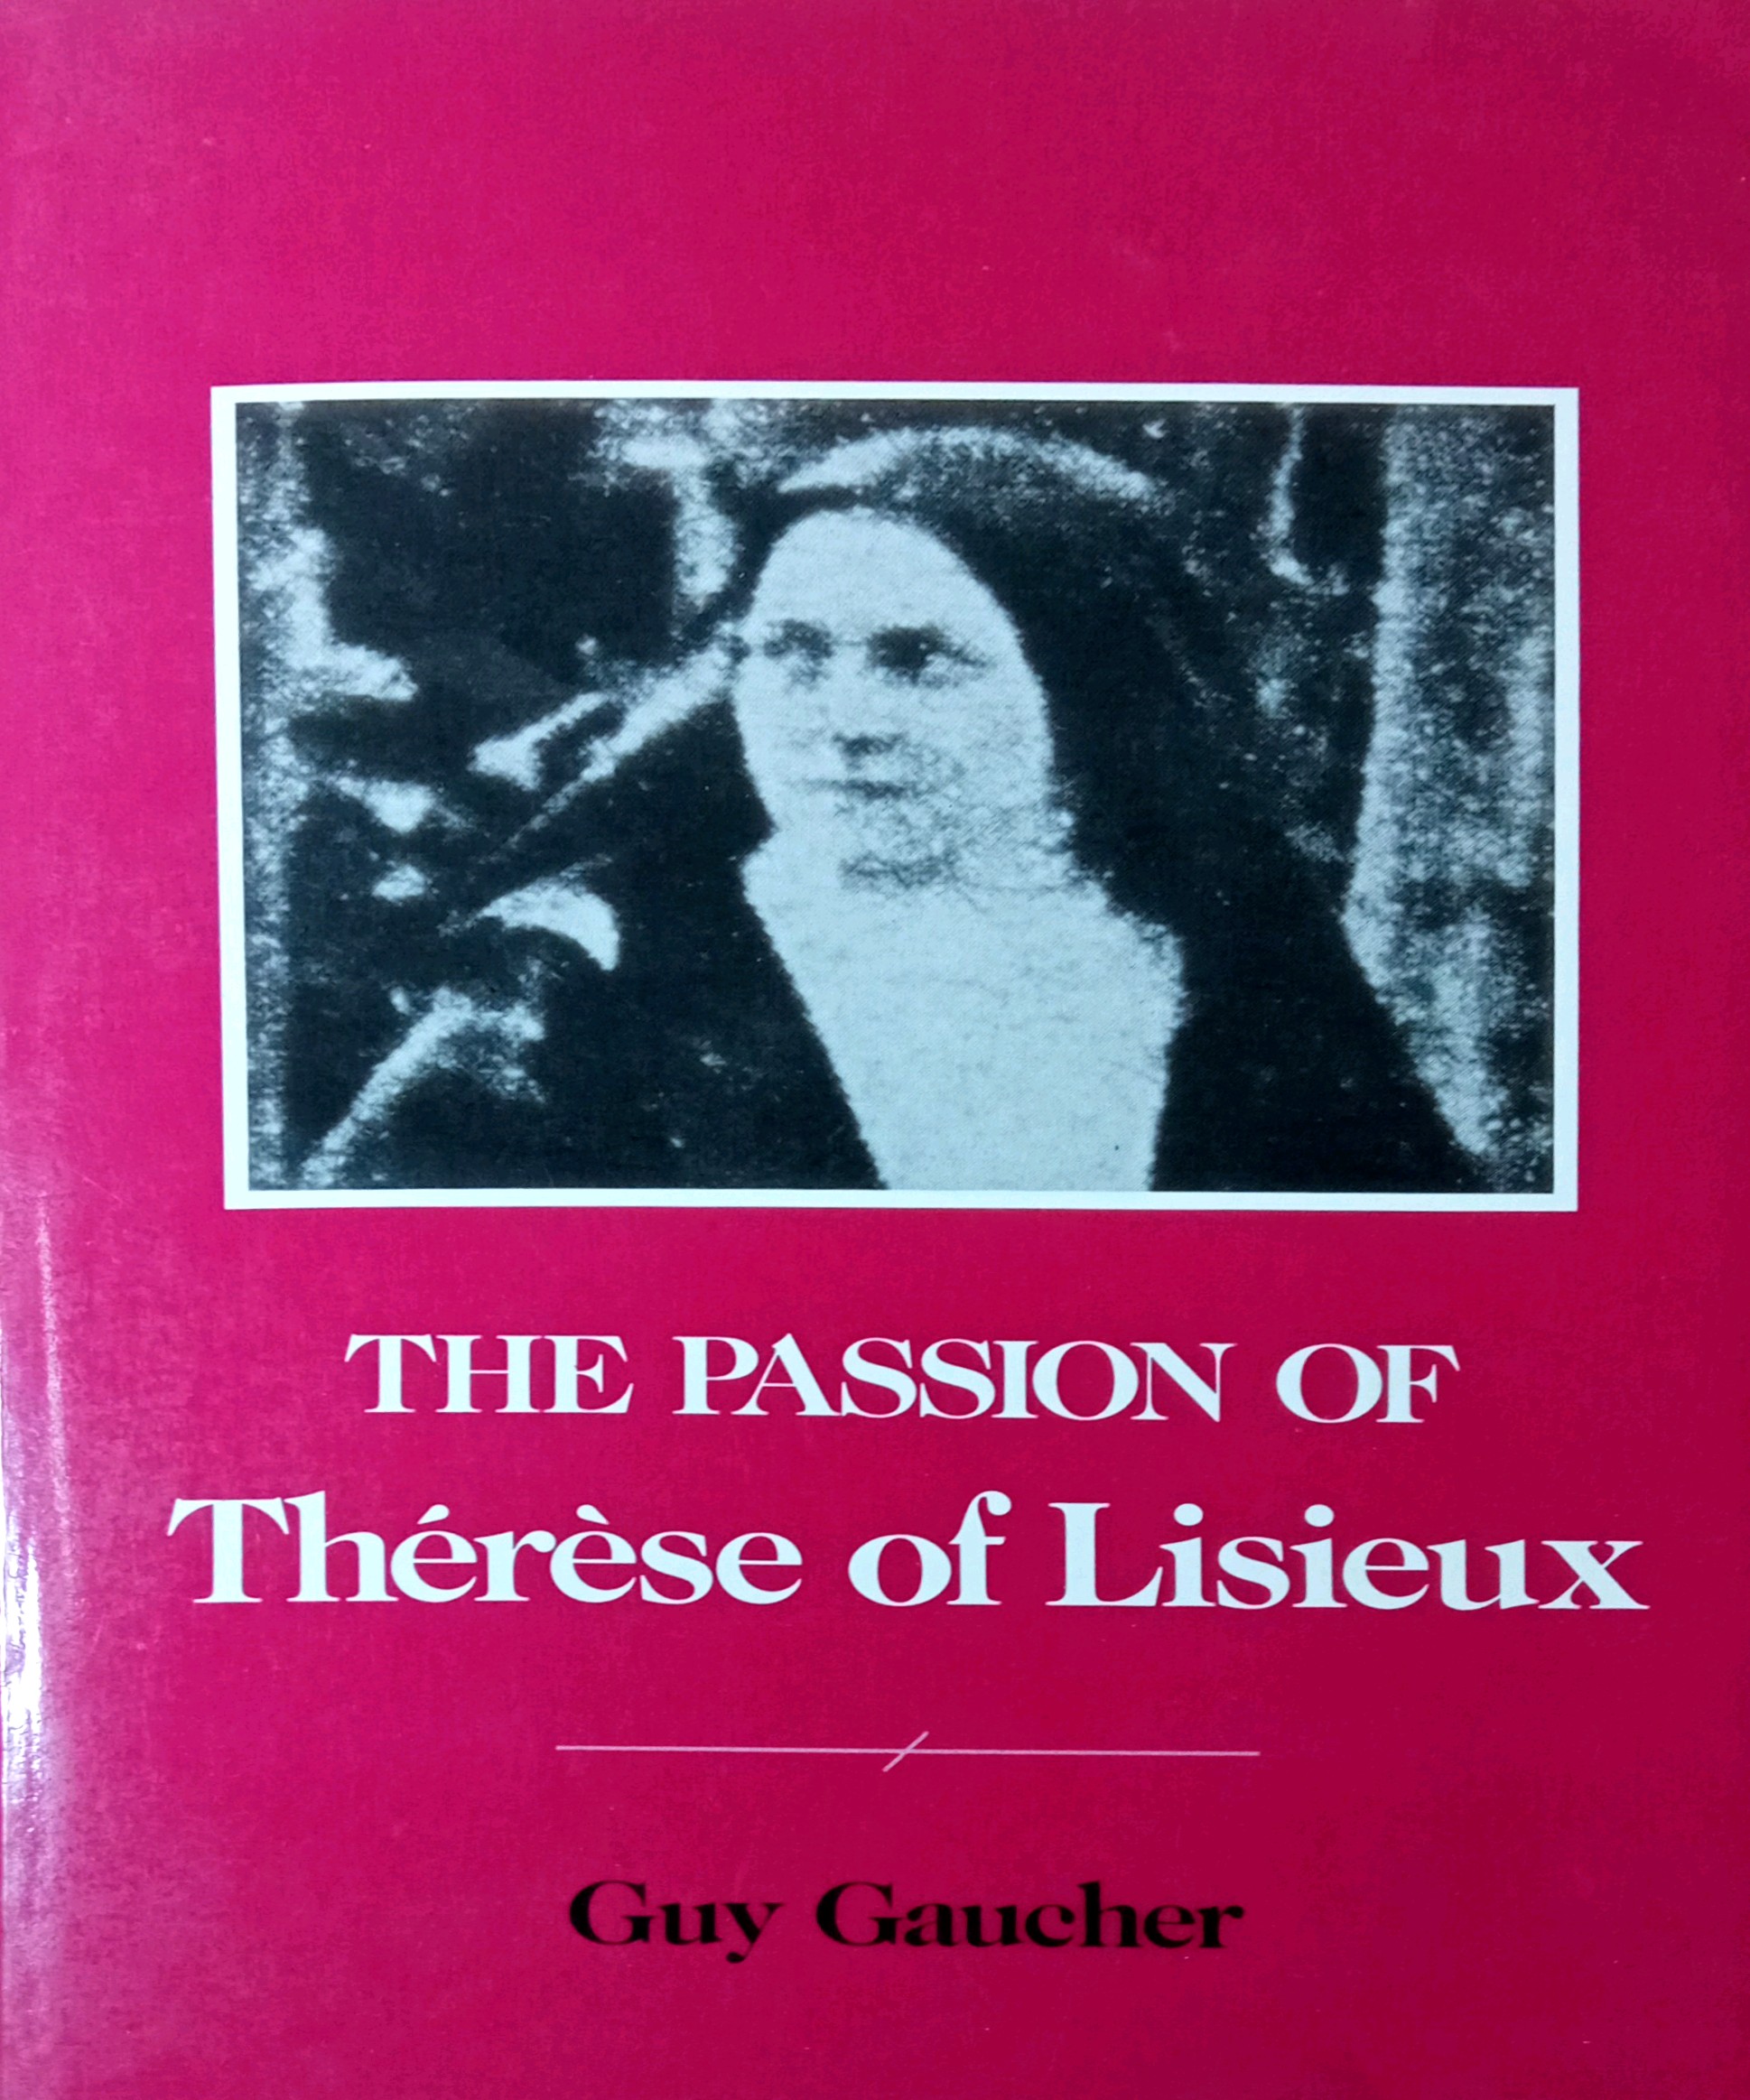 THE PASSION OF THÉRÈSE OF LISIEUX